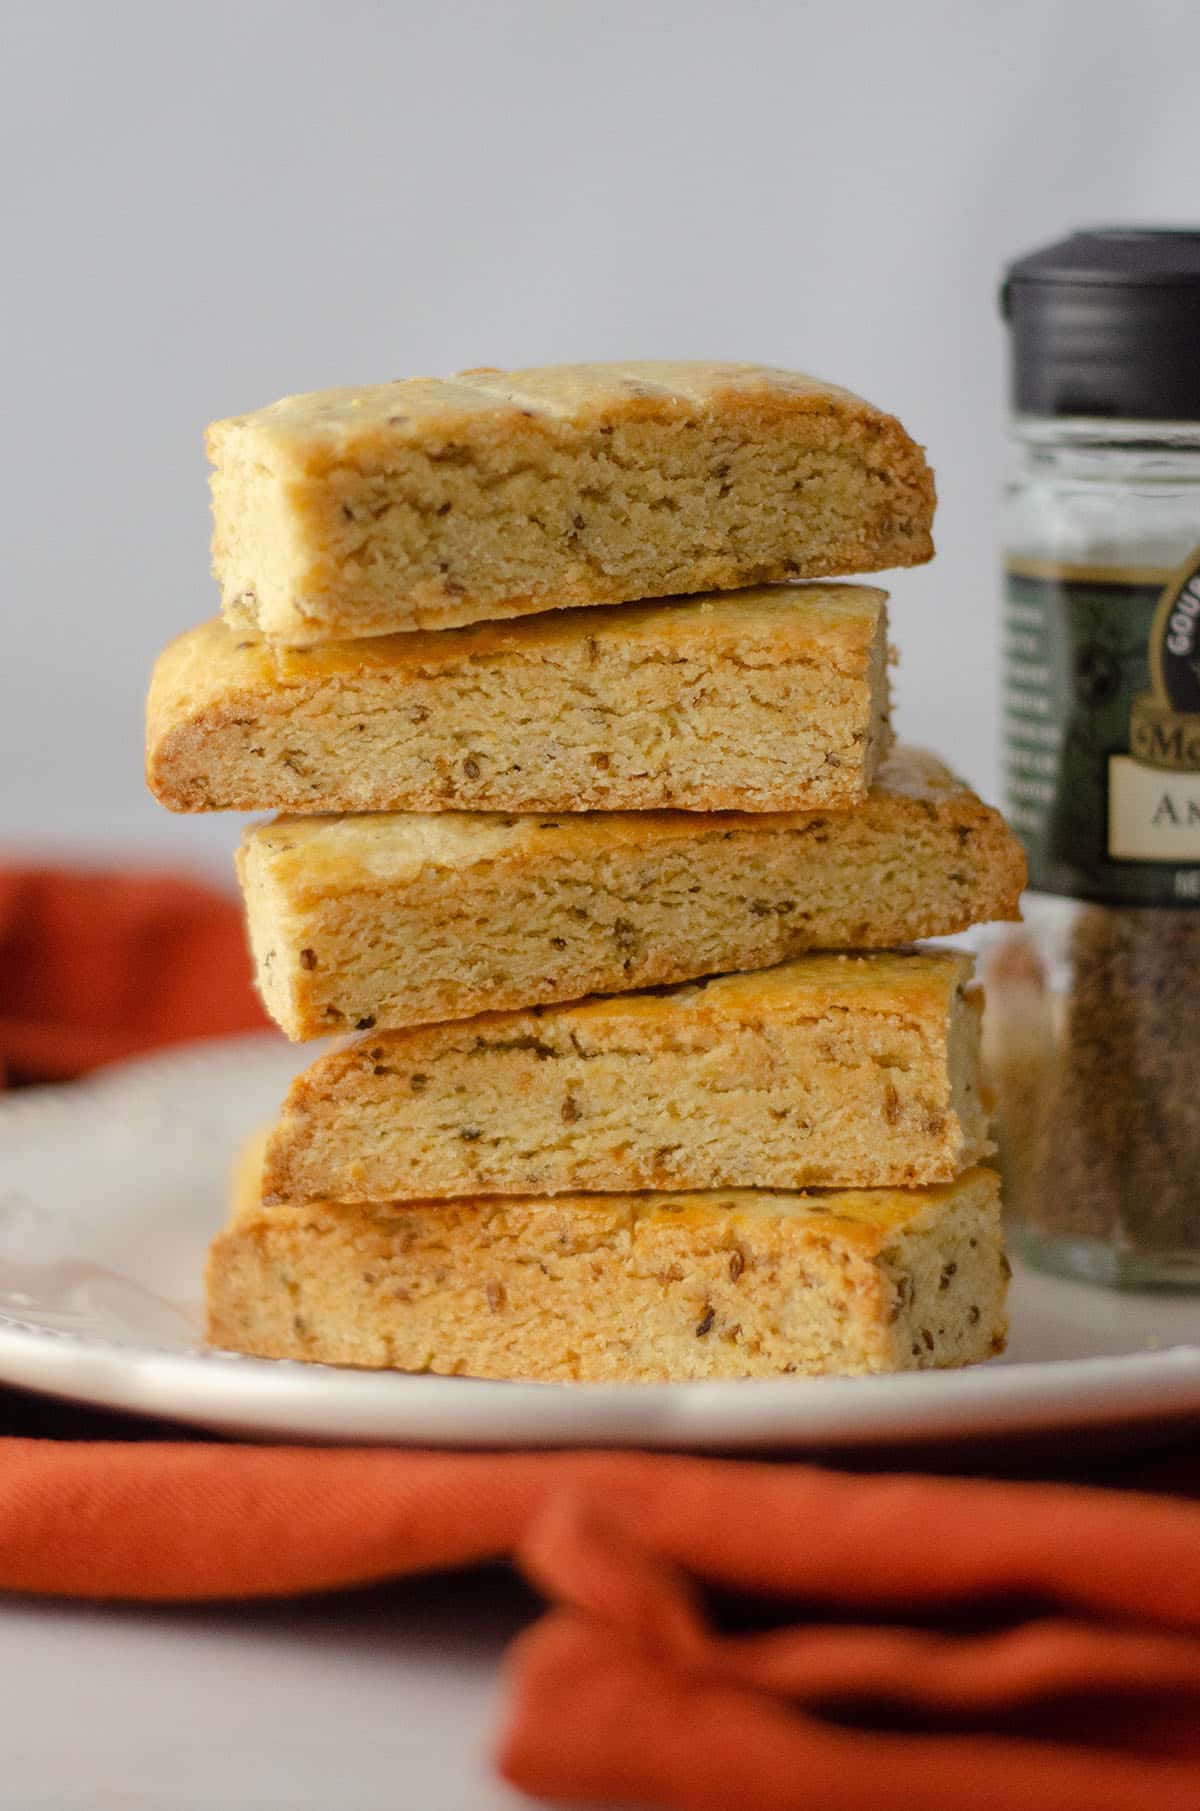 Traditional Italian Anise Biscotti: Basic biscotti cookies flavored with anise extract and anise seed.